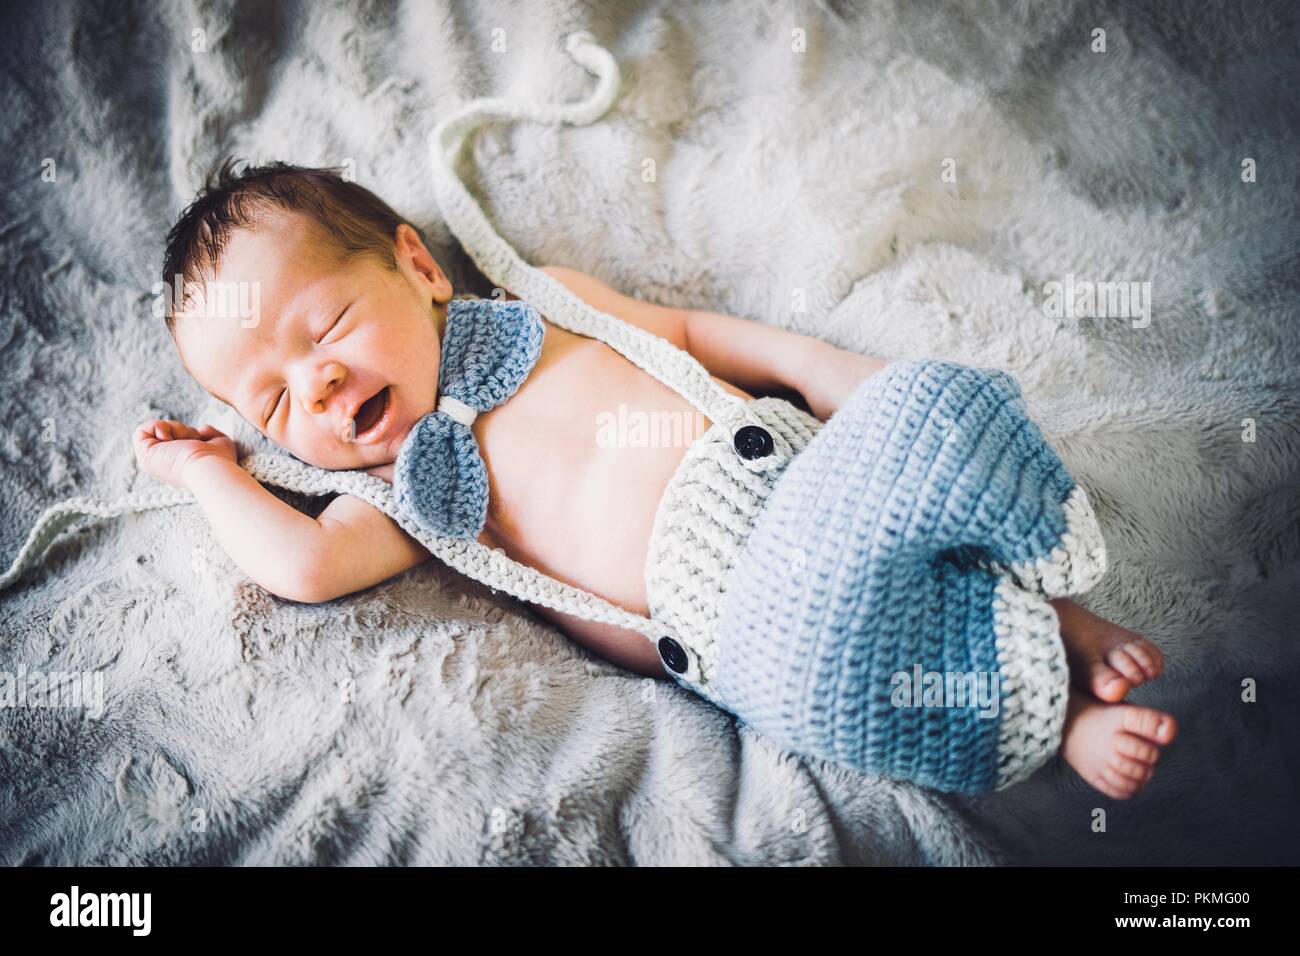 A newborn baby boy sleeping in blue and grey knitted bow tie and trousers, Portugal Stock Photo